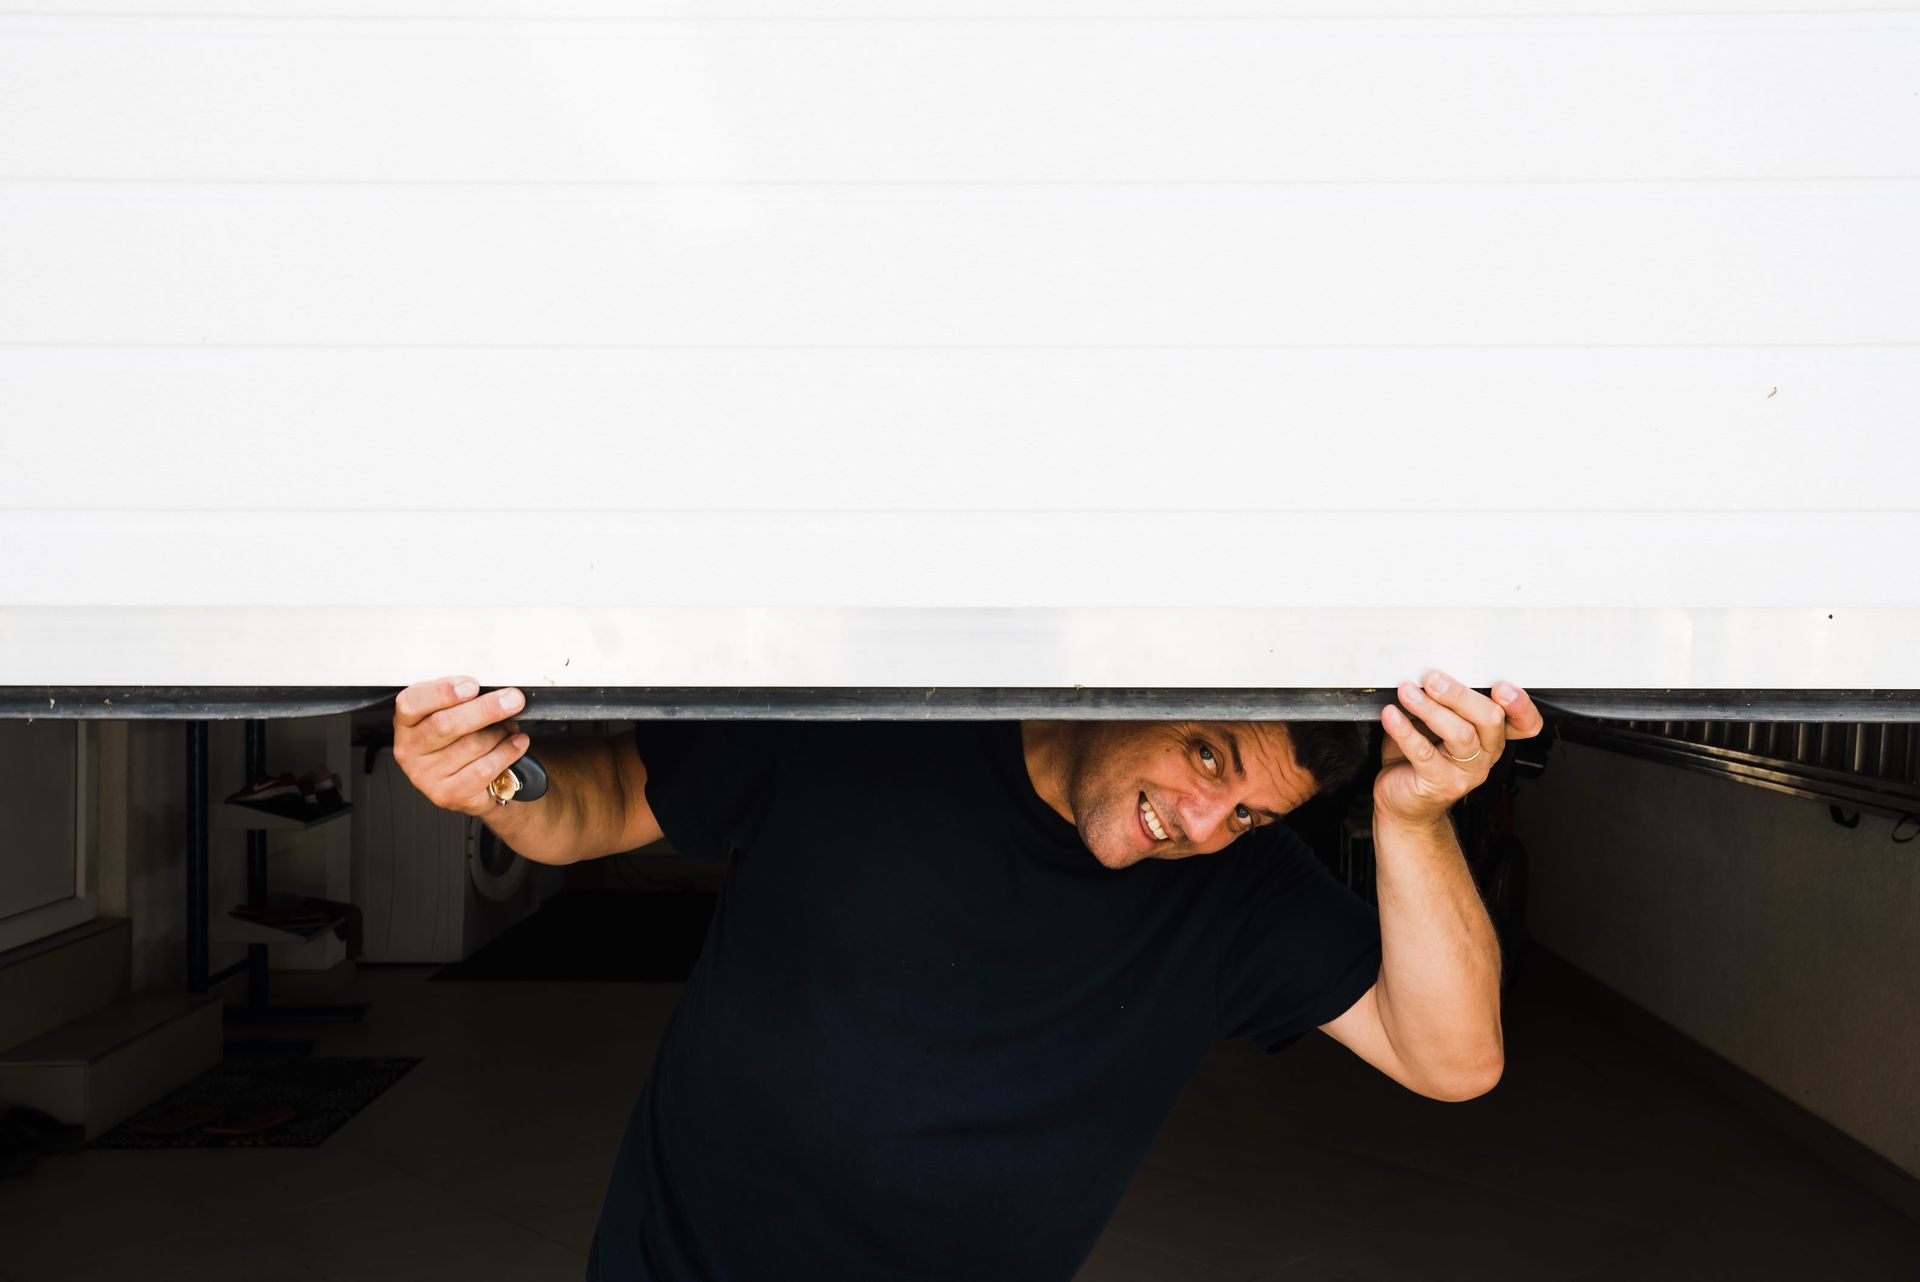 A man showing the camera how to manually open a garage door